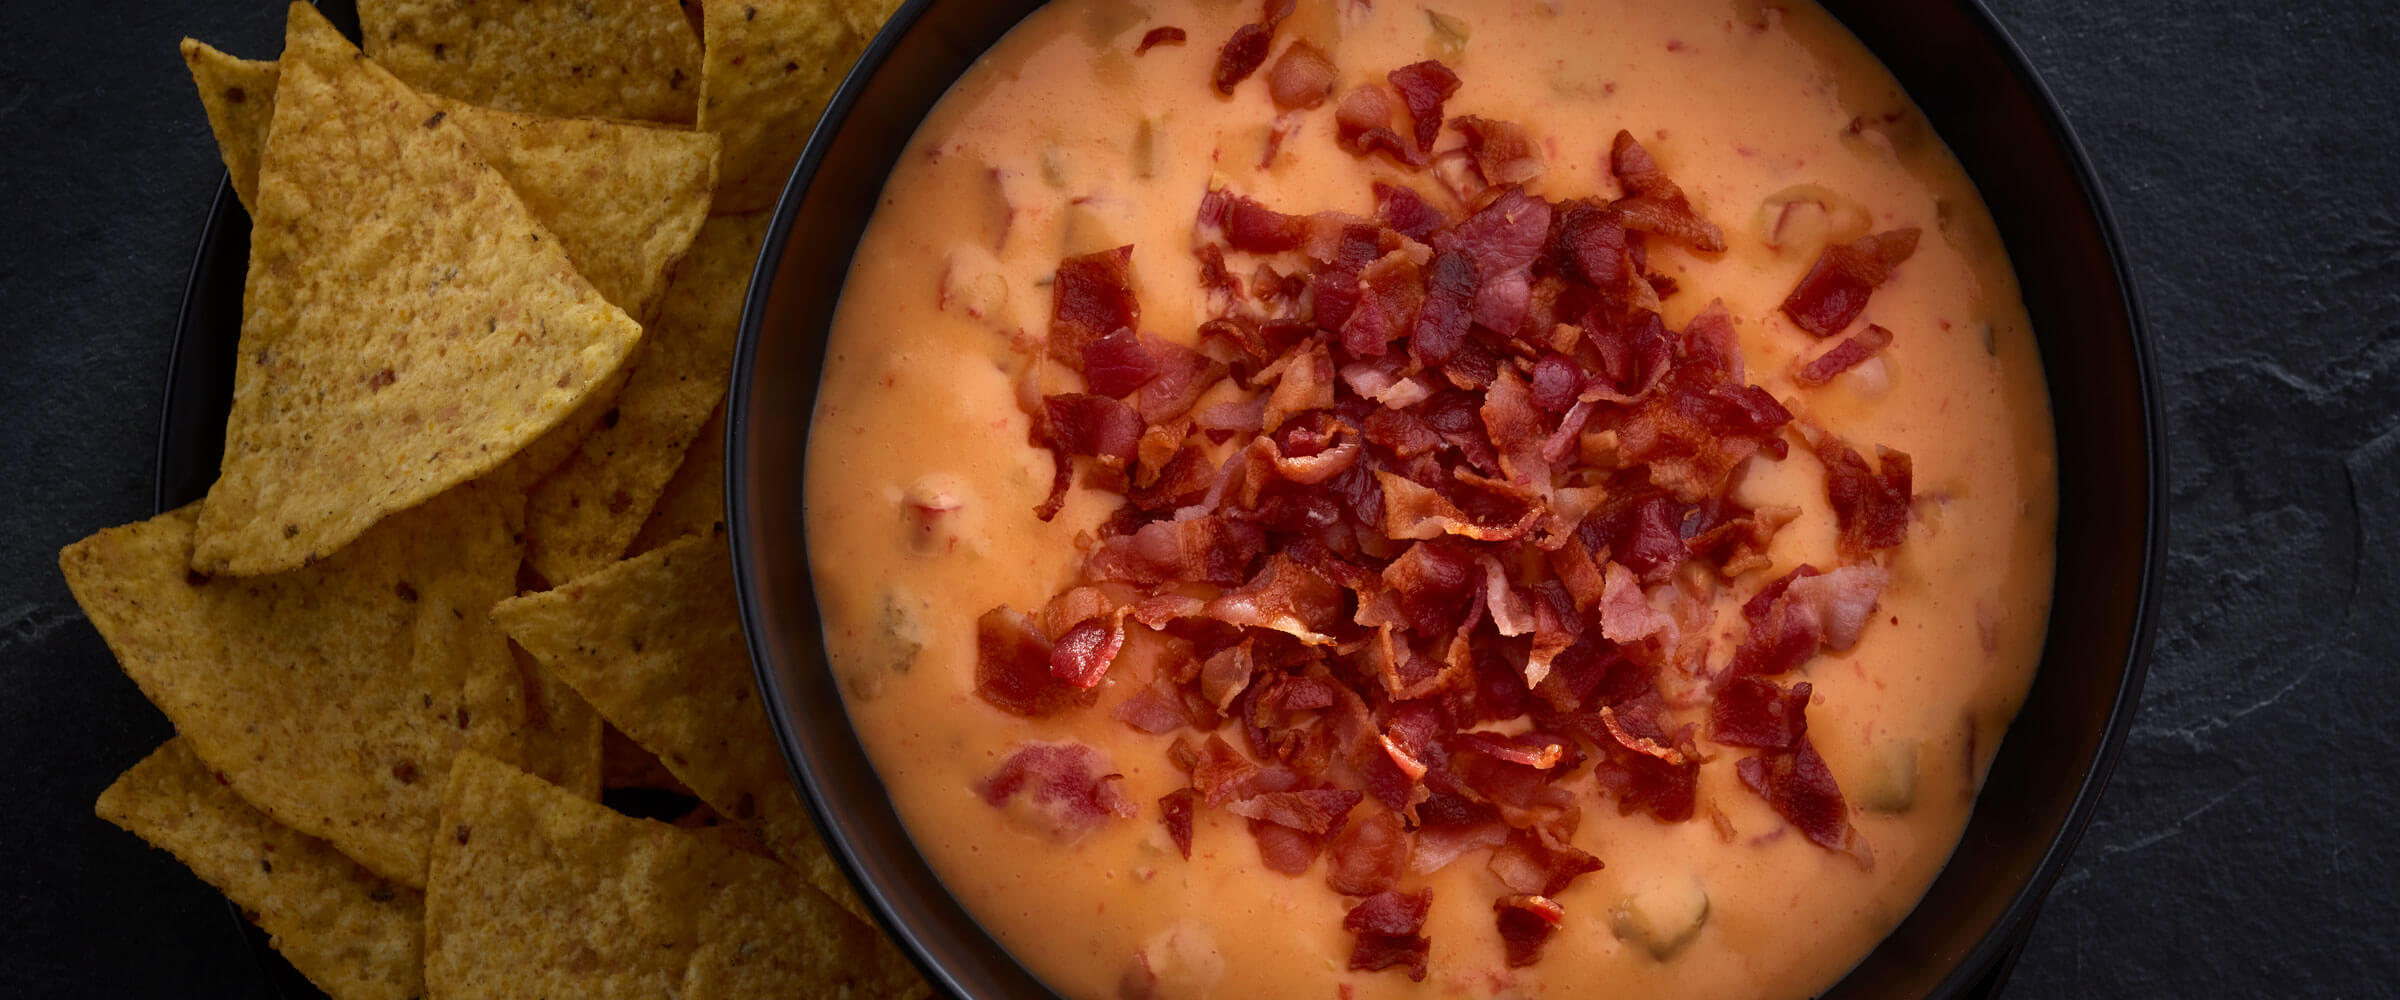 Bacon queso dip in bowl with chips on side